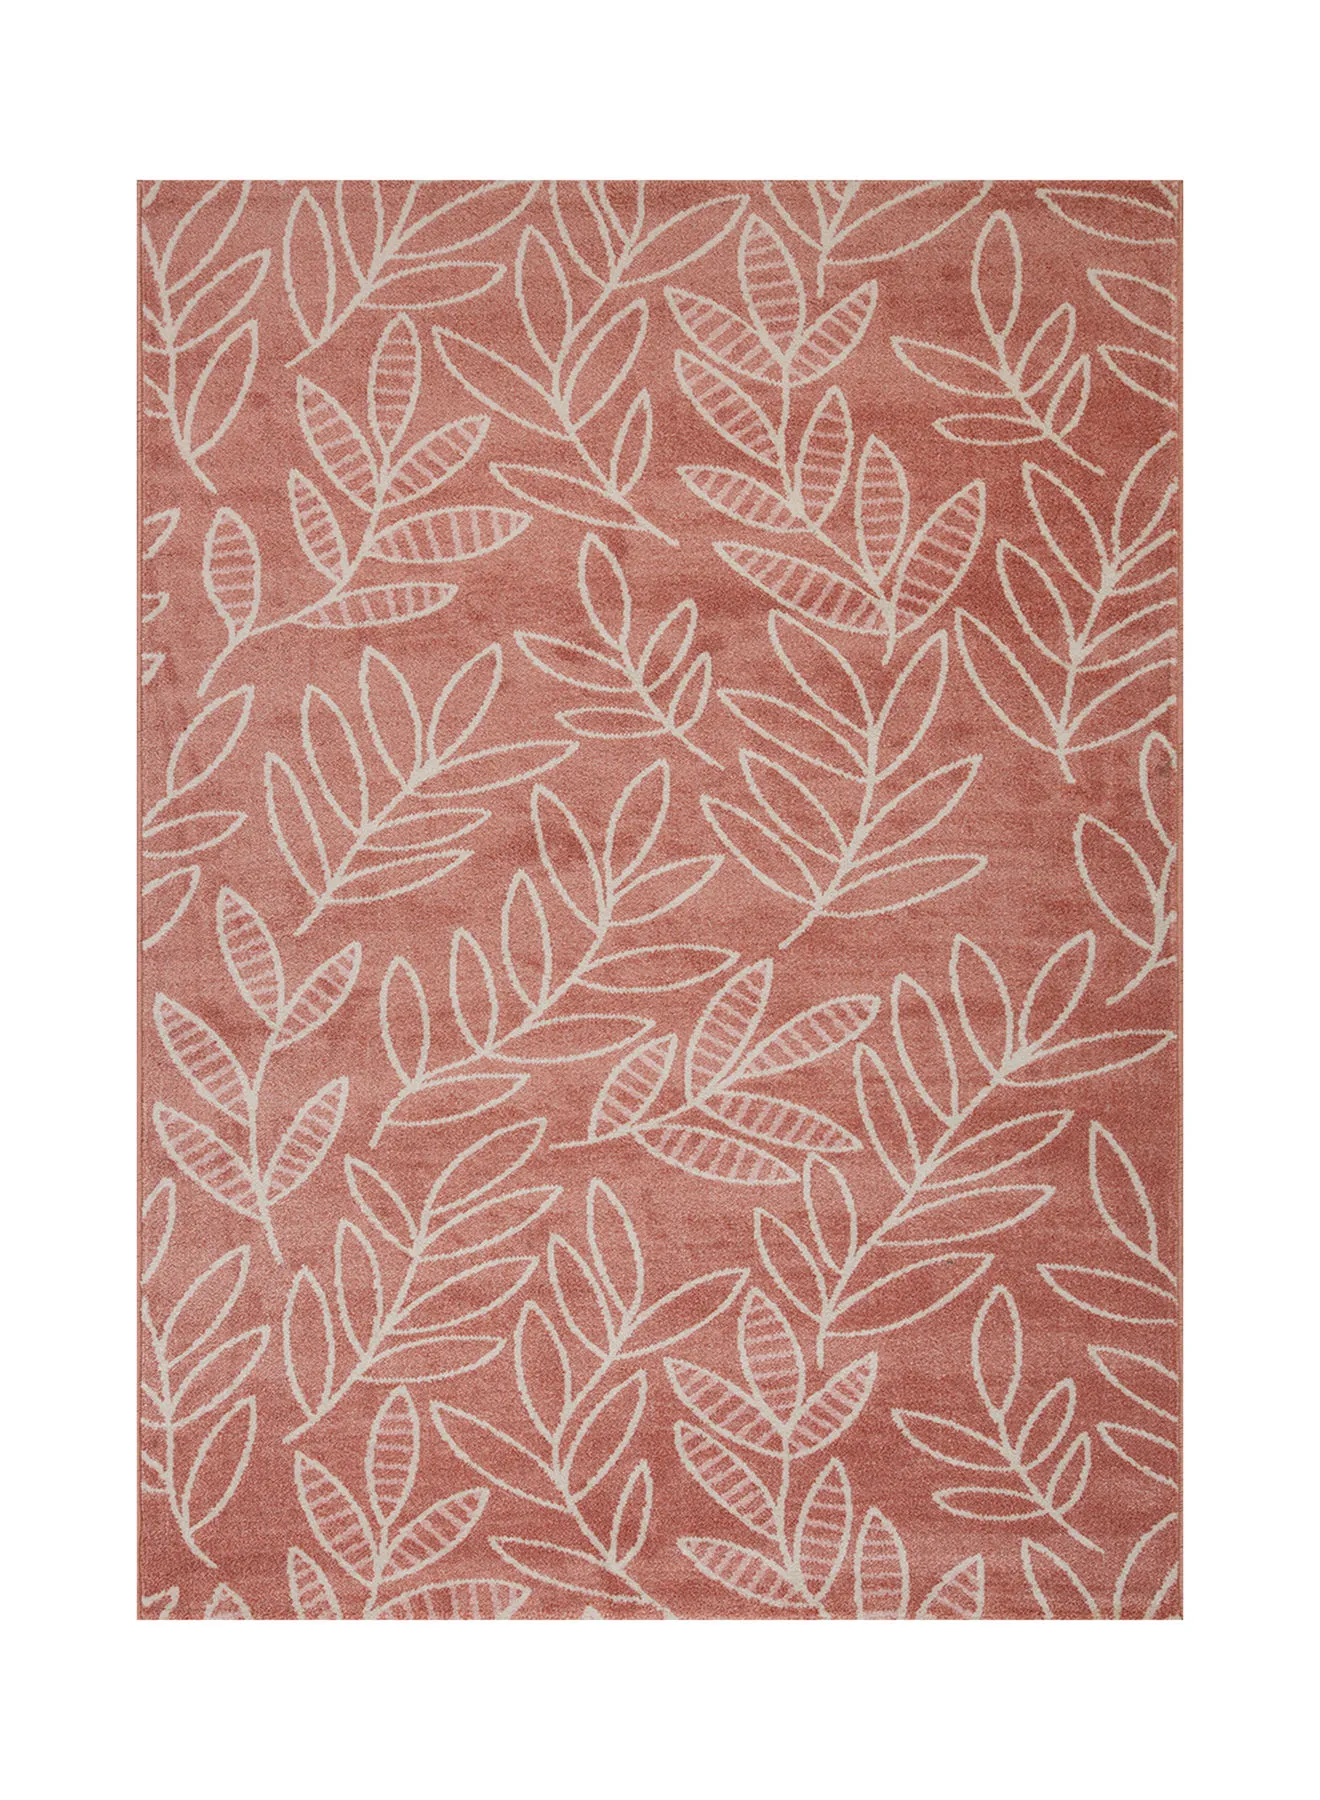 Switch Sanford Unique Luxury Quality Material For The Perfect Stylish Home Soft And Comfort Level 59C Pink 280 x 380cm